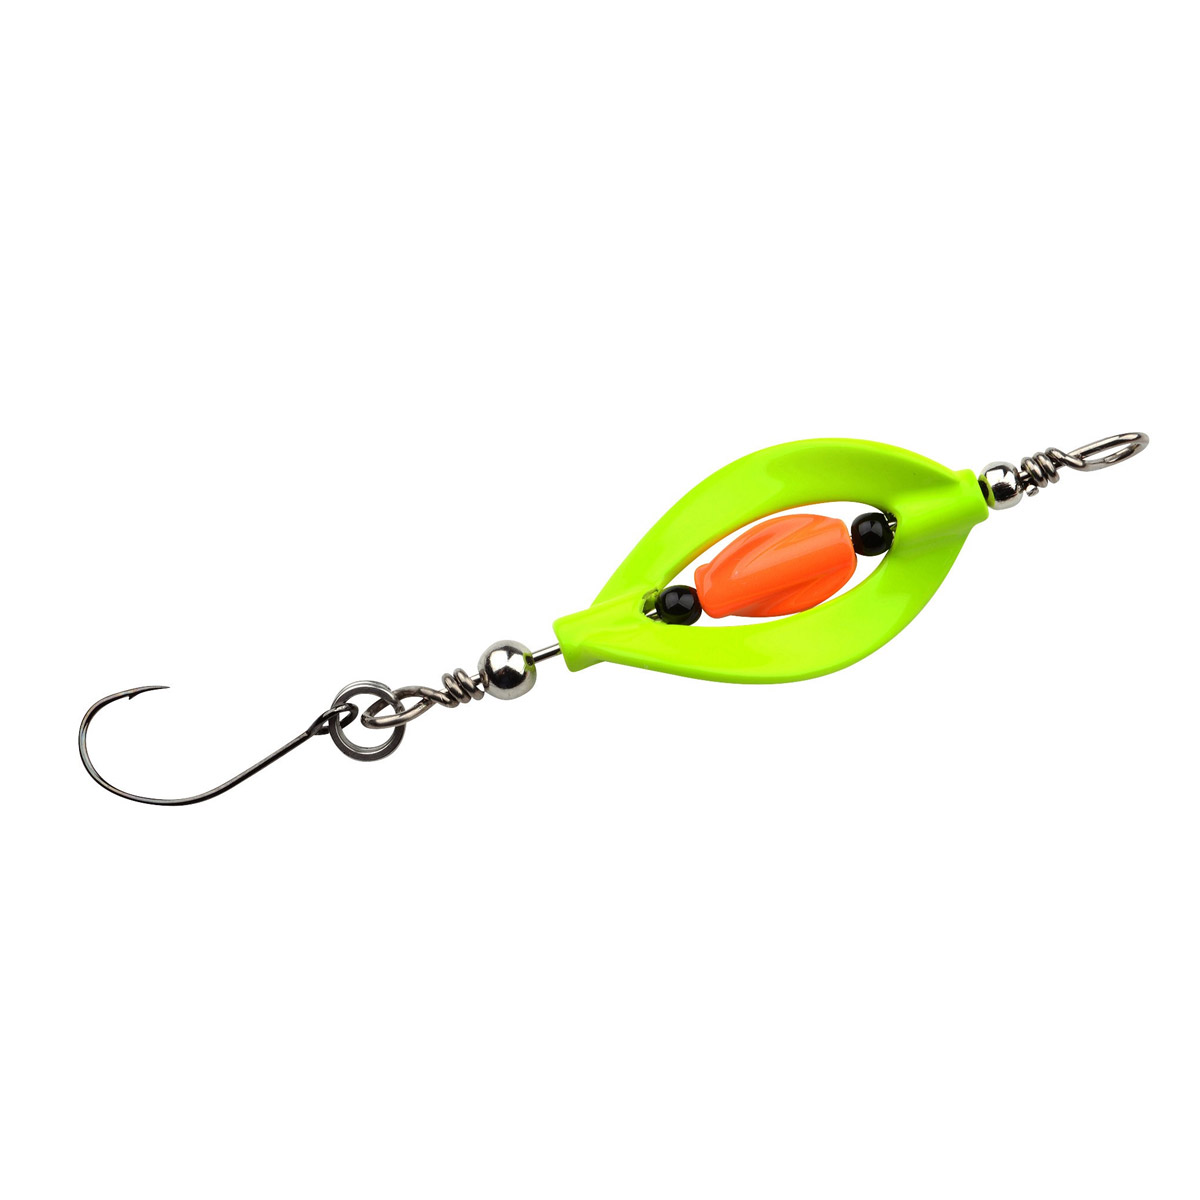 Spro Trout Master Incy Double Spin Spoon -  Melon